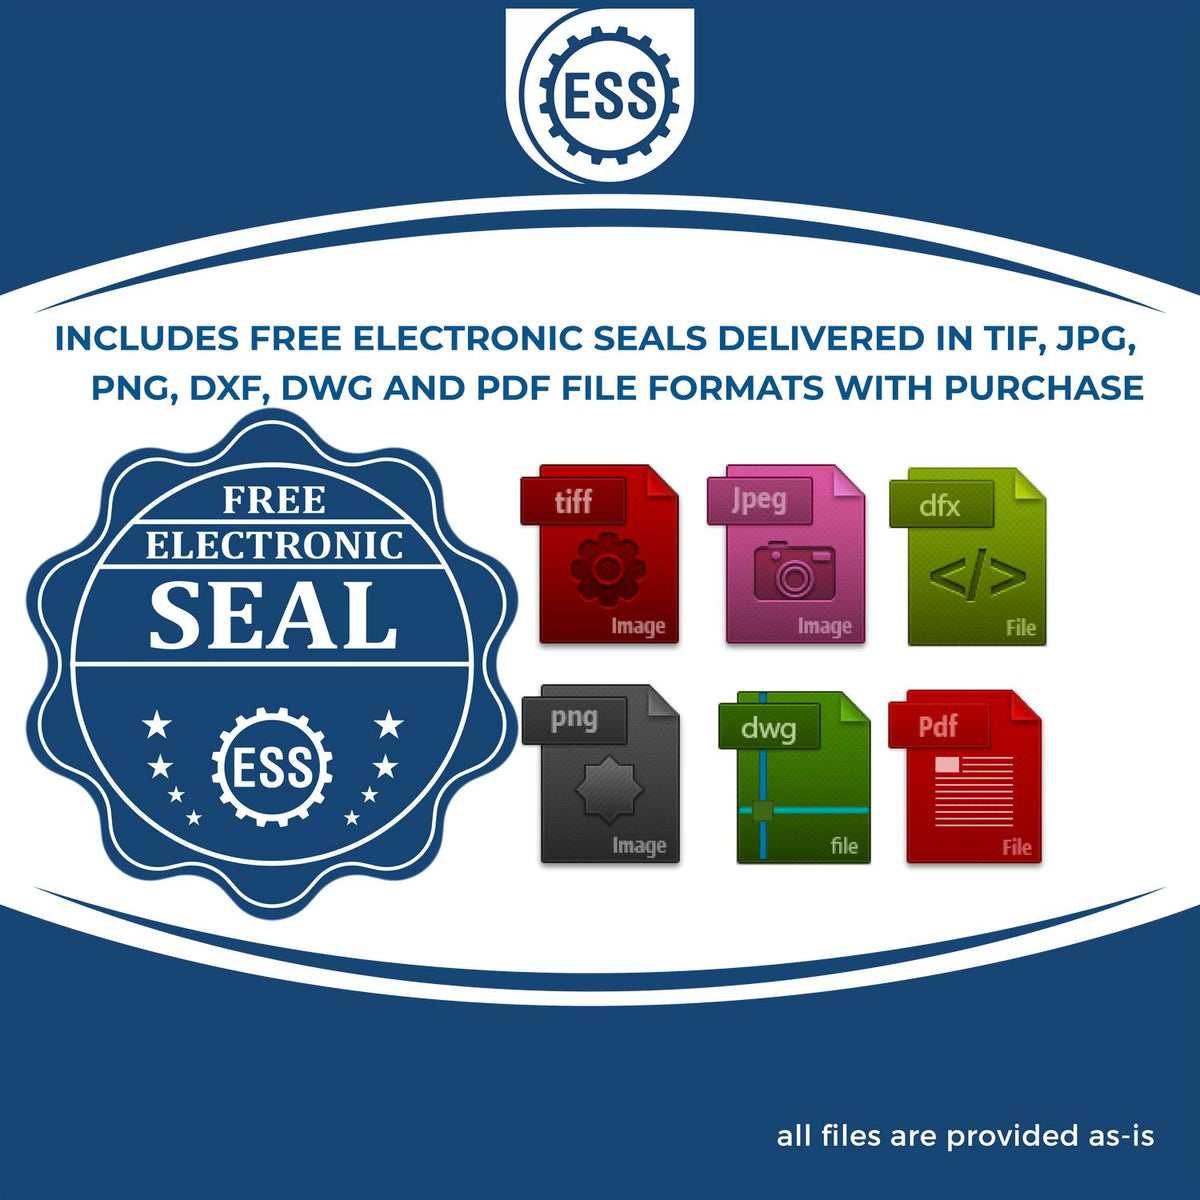 An infographic for the free electronic seal for the Handheld Ohio Professional Engineer Embosser illustrating the different file type icons such as DXF, DWG, TIF, JPG and PNG.